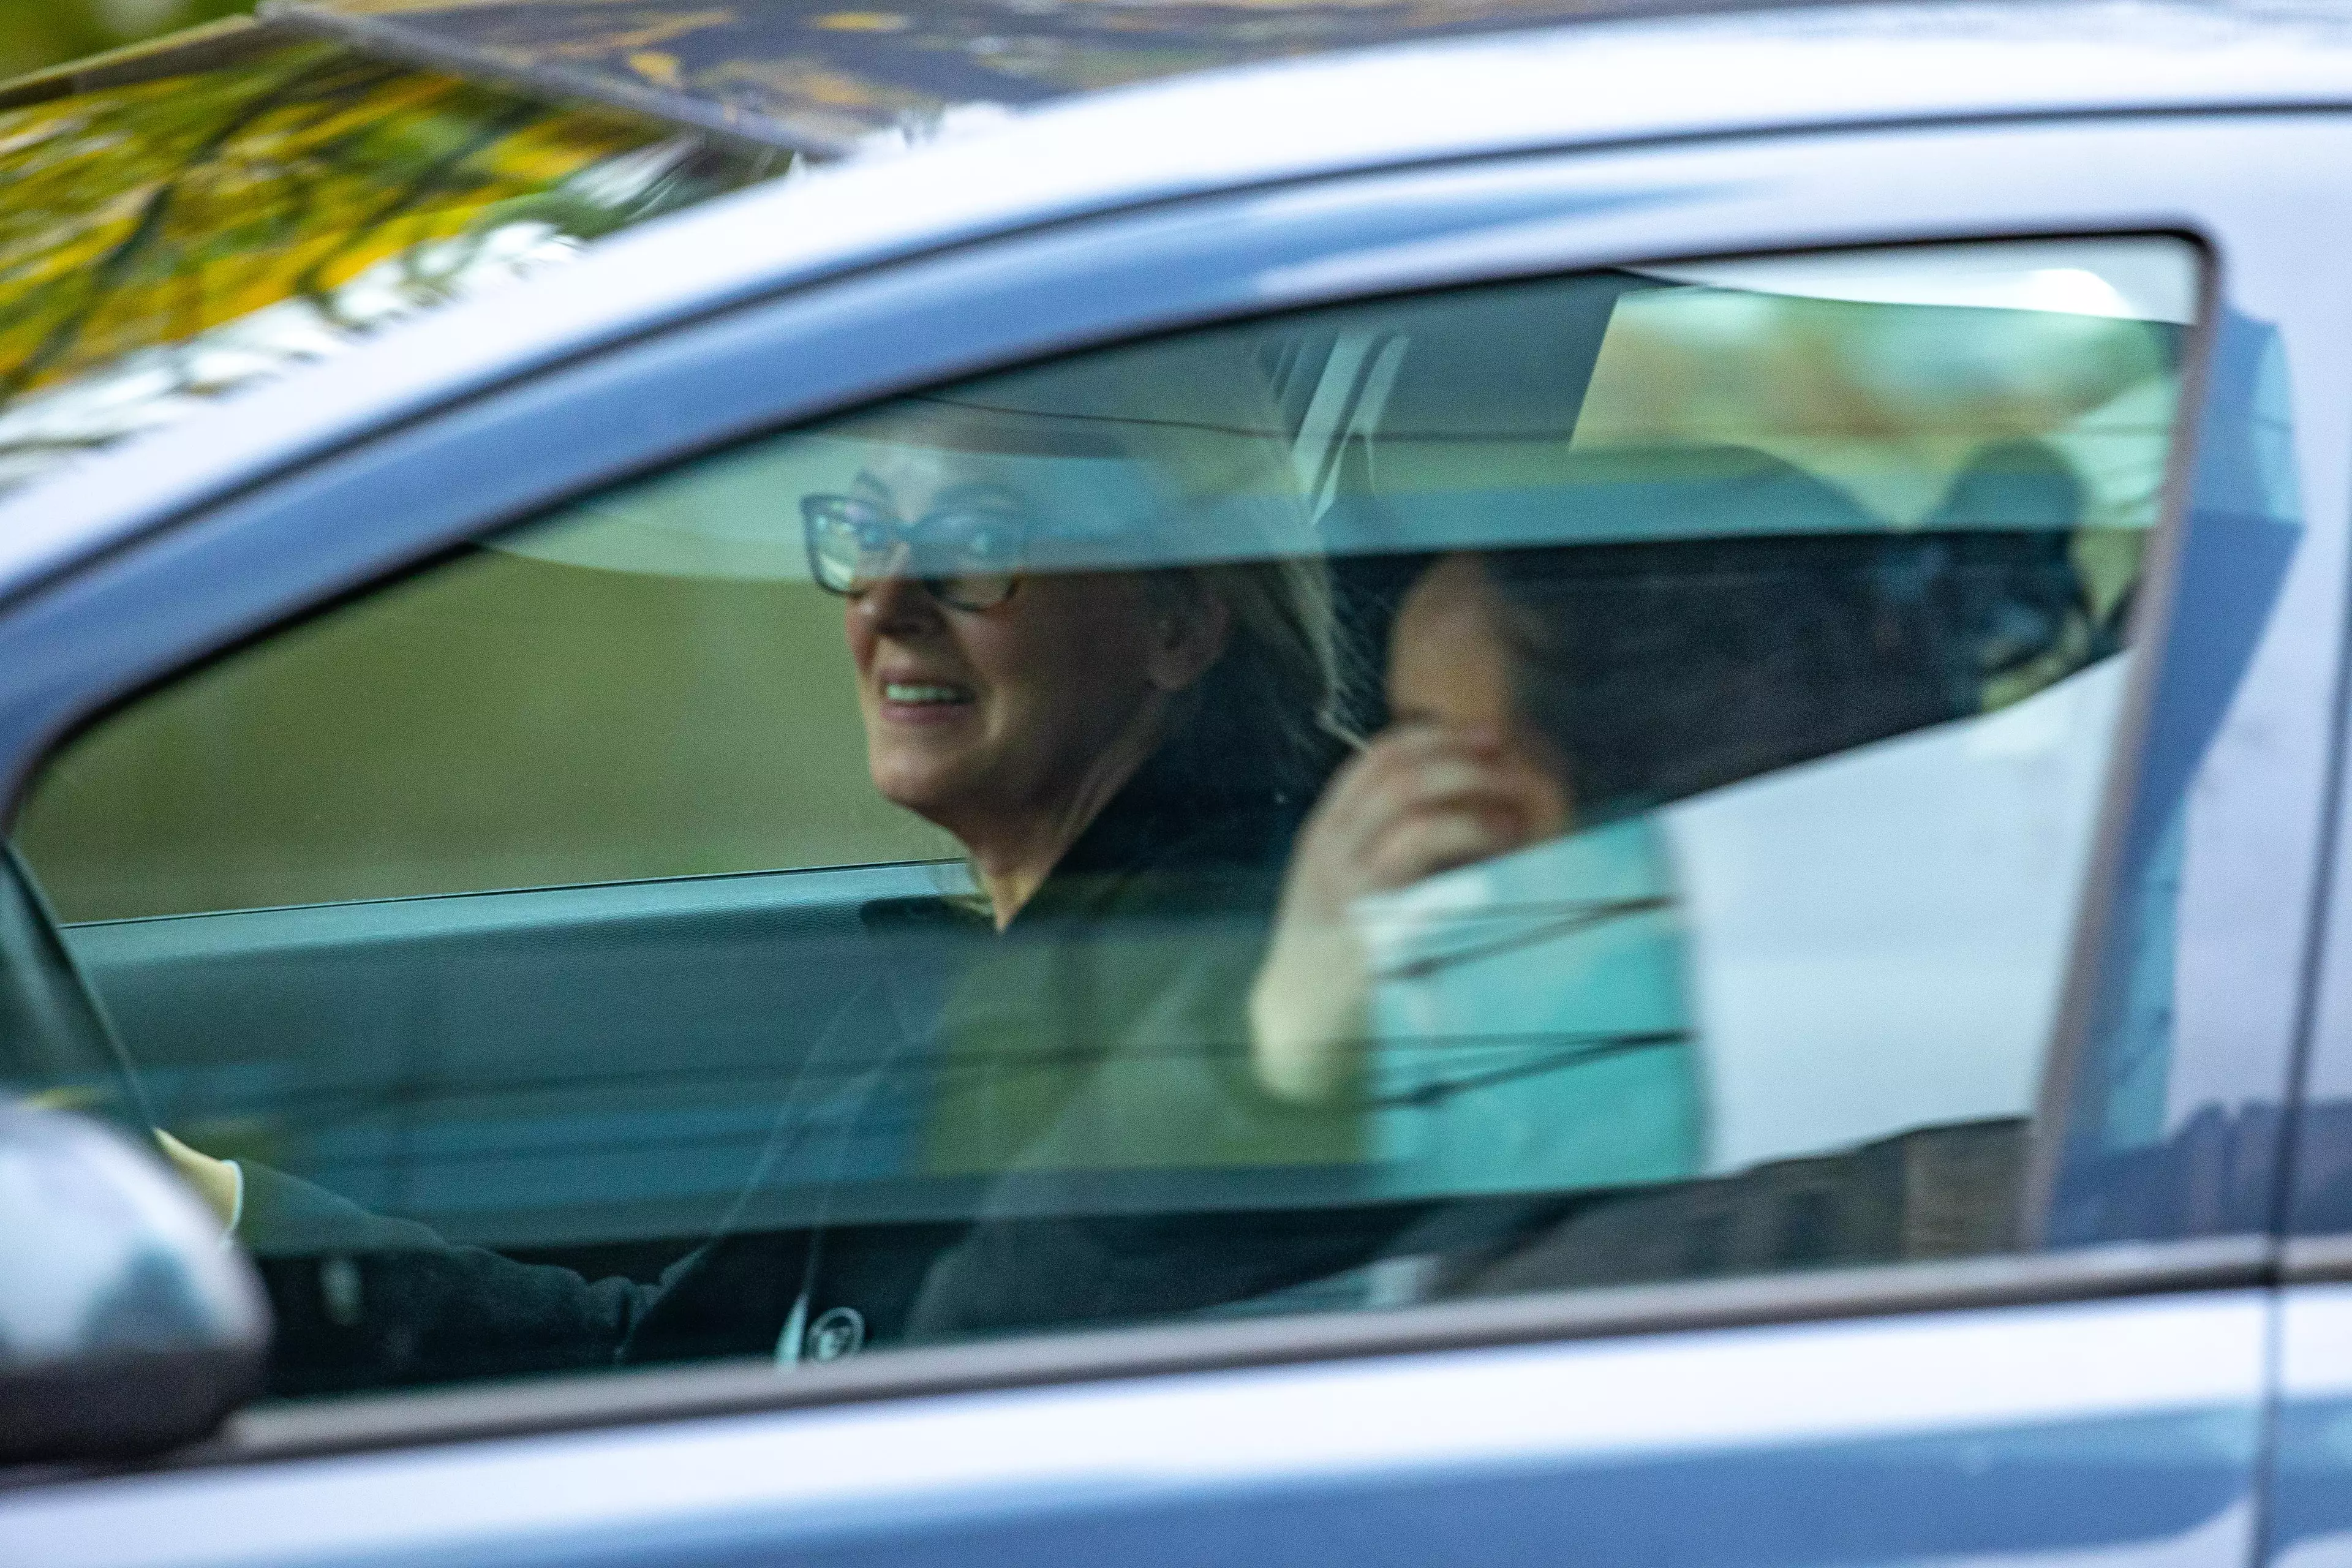 Knopka was pictured driving away from court after she received the driving ban.